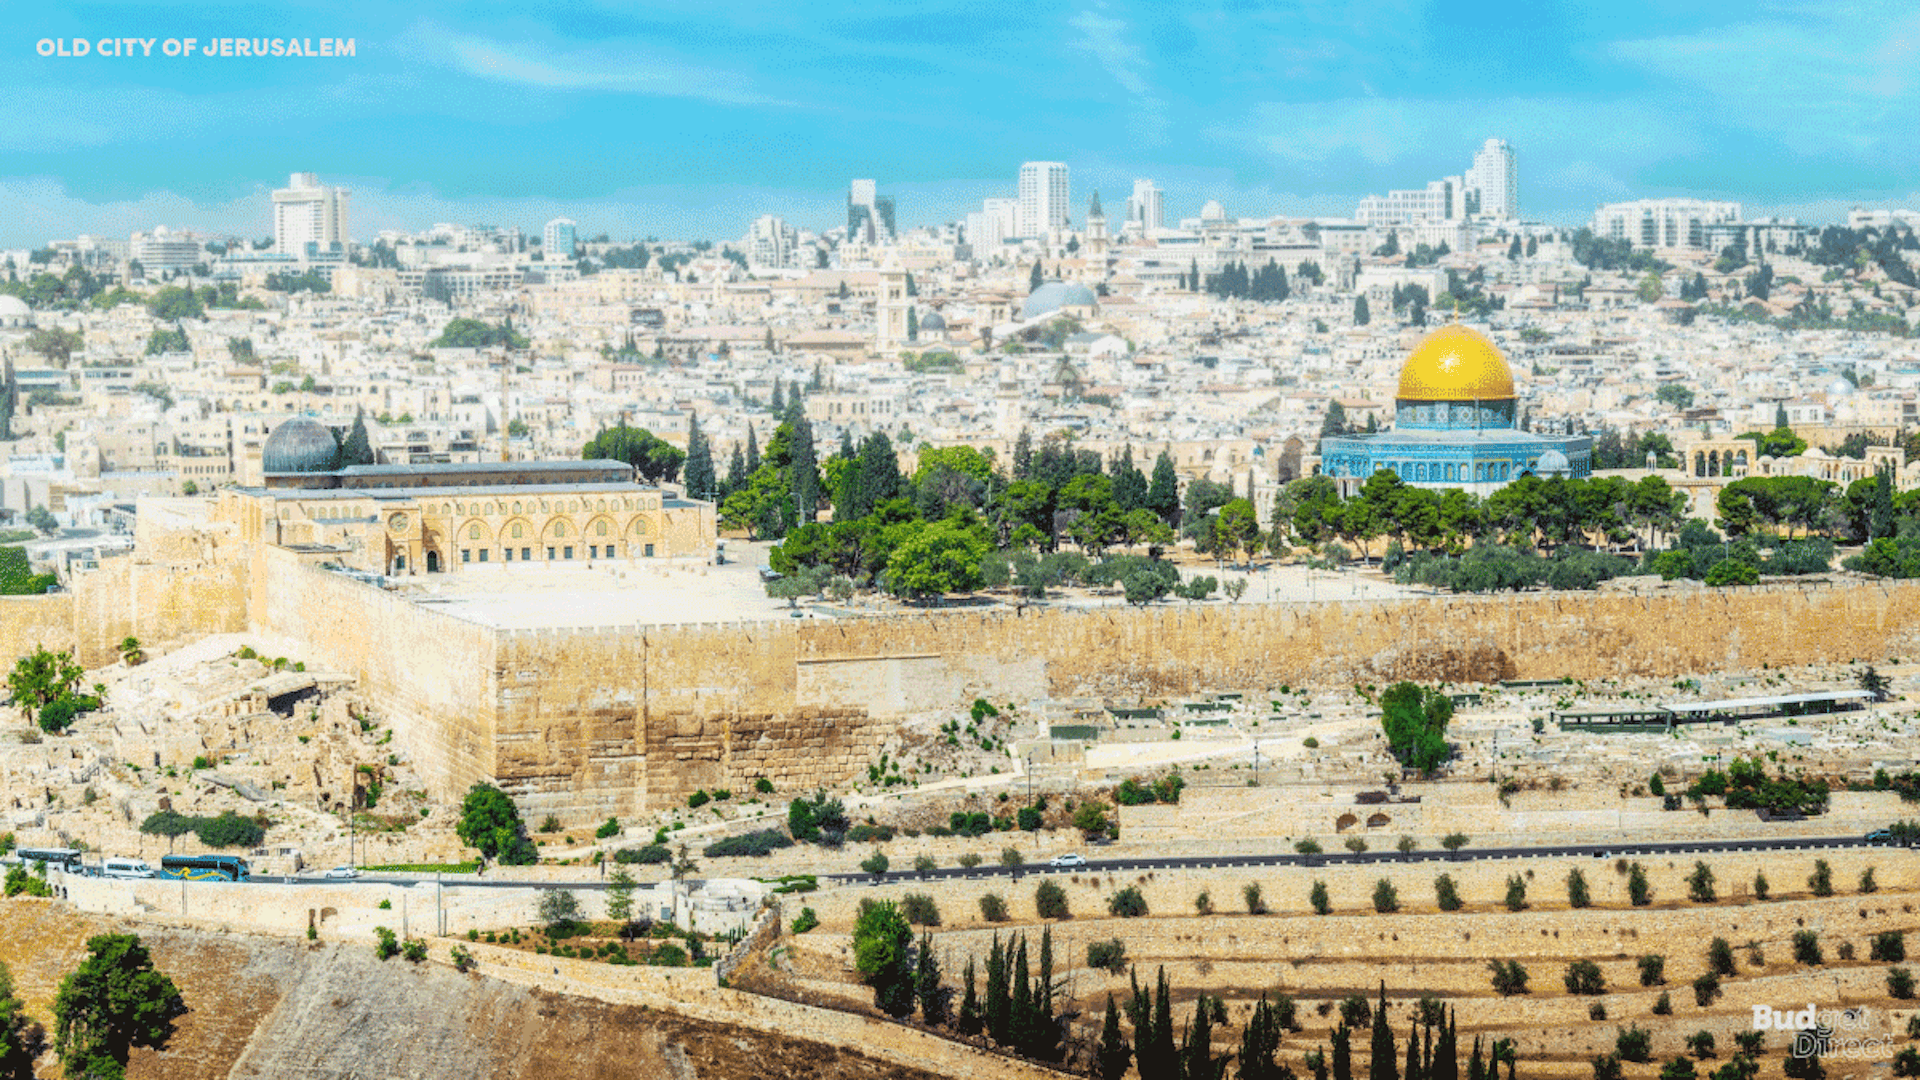 A gif of Jerusalem, virtually restored to appear as it did in the 1500s